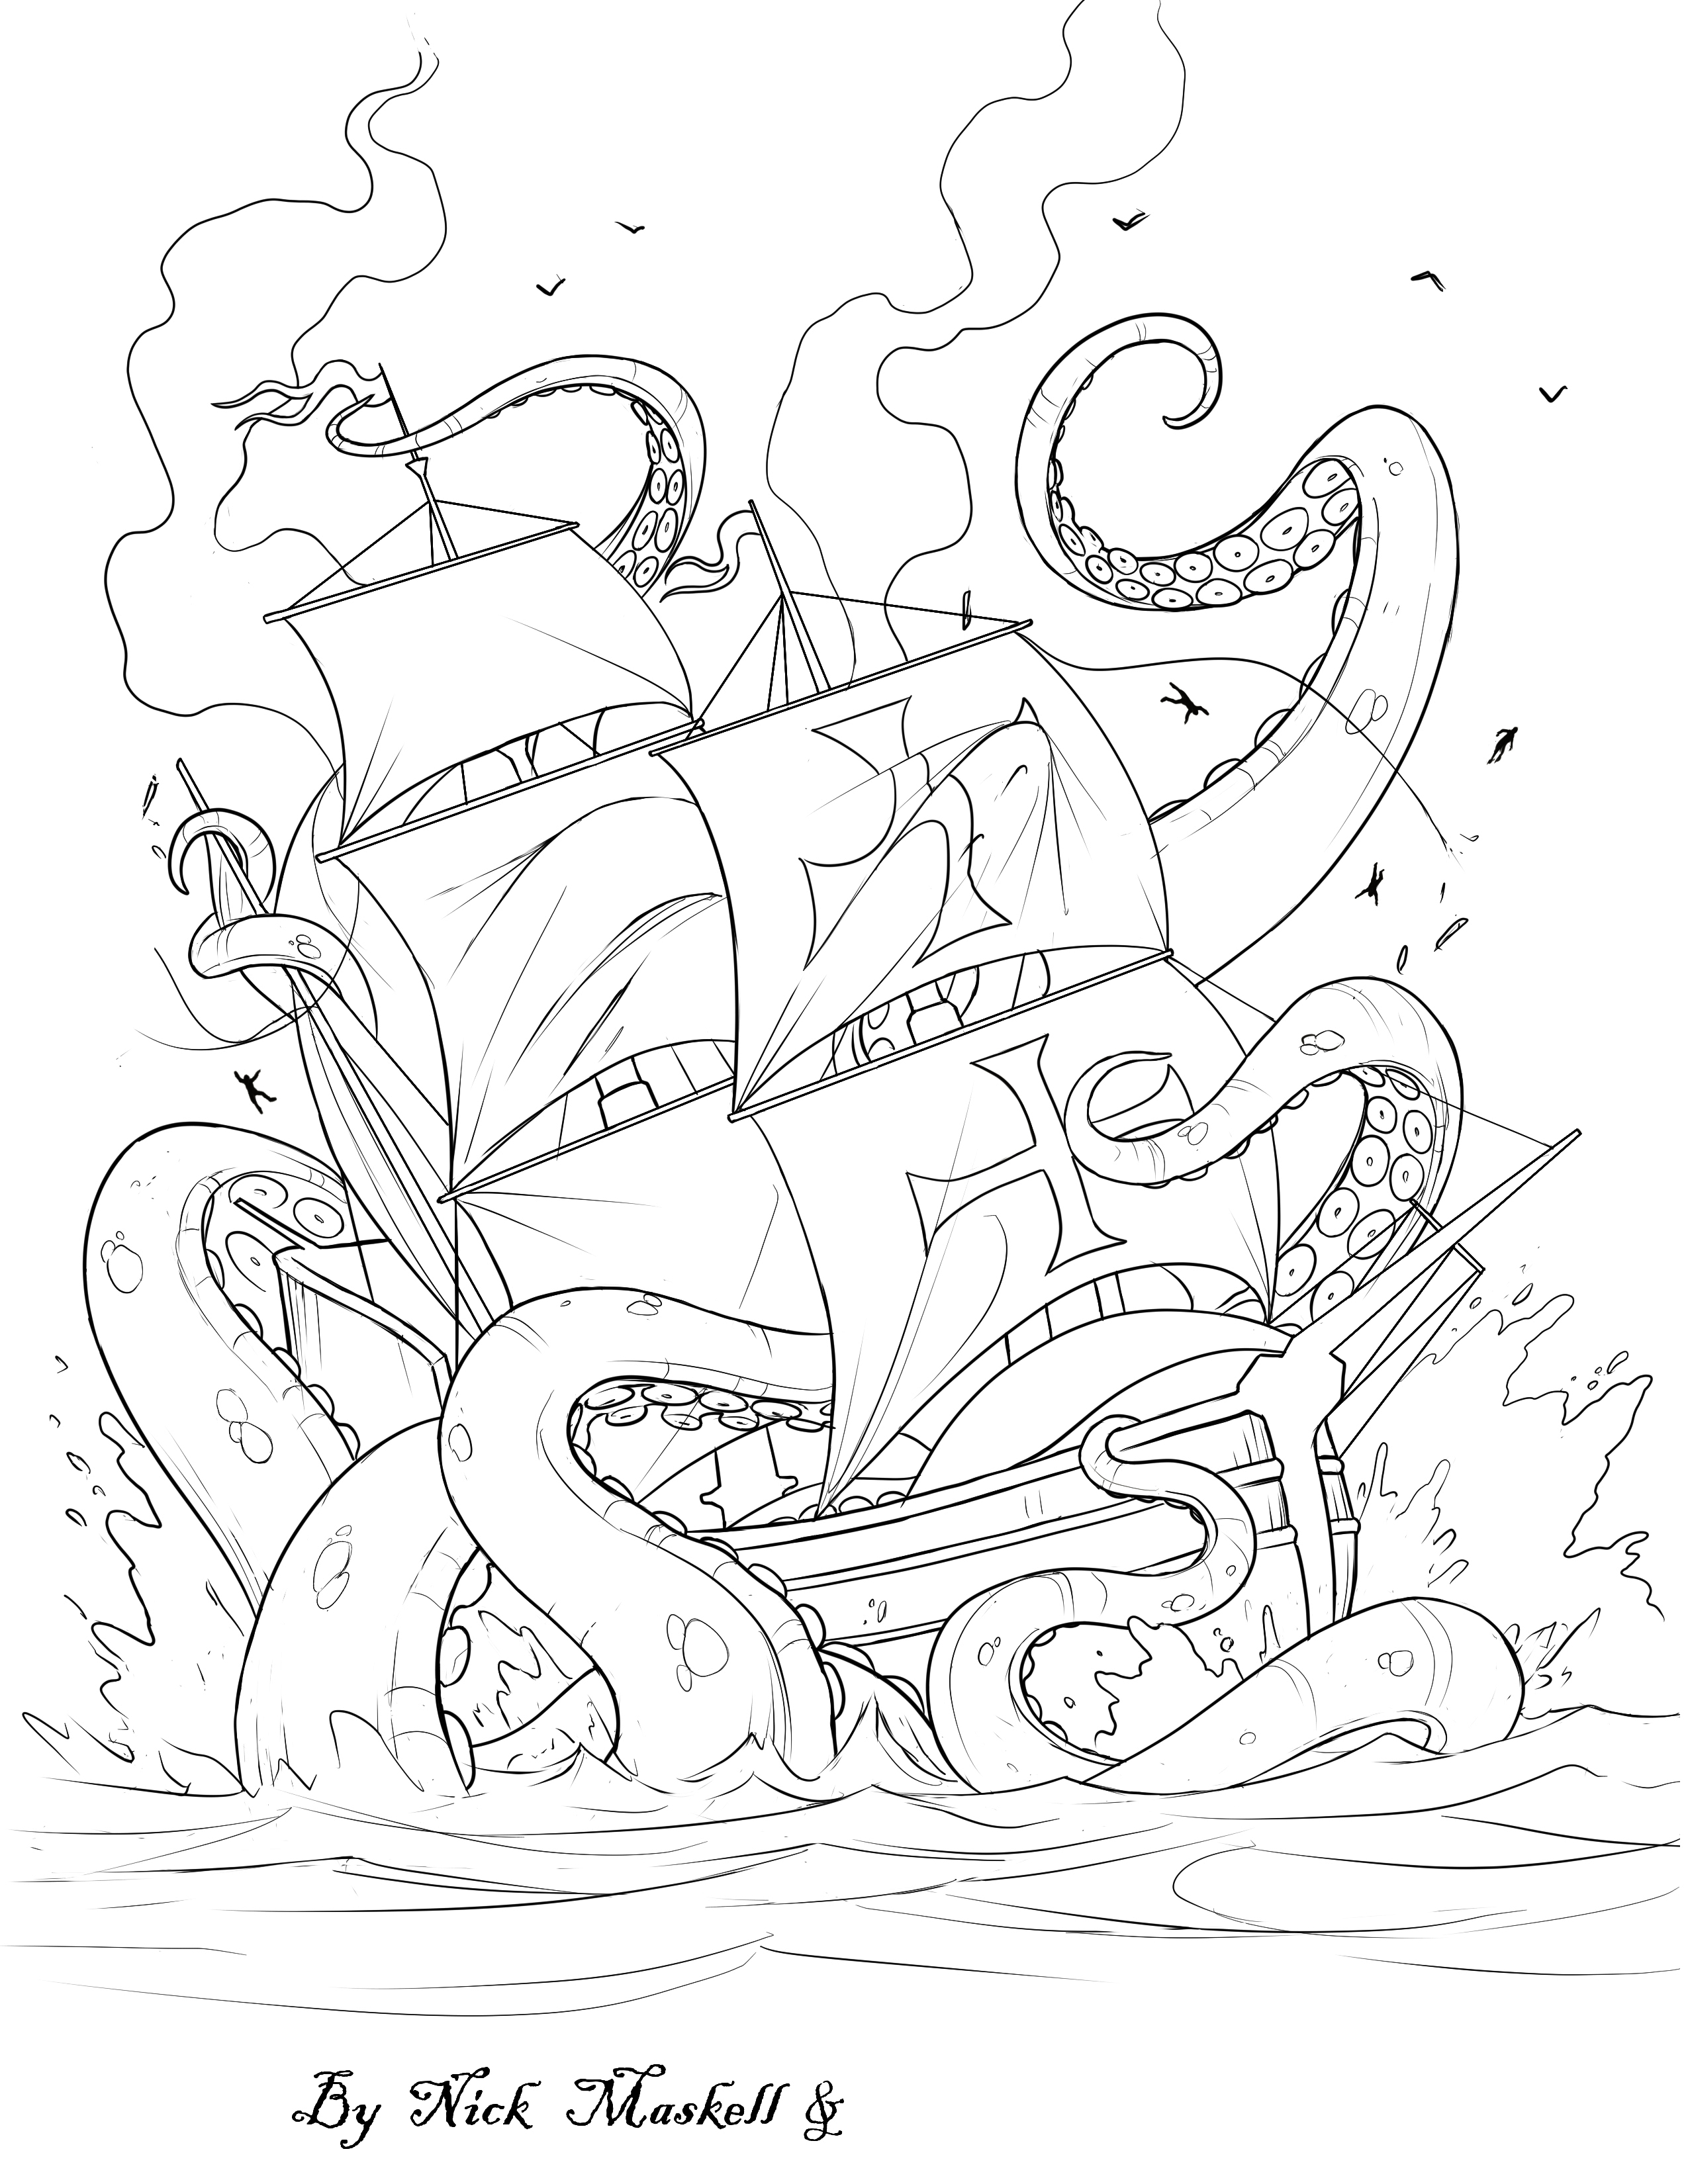 Free coloring pages â nick maskell